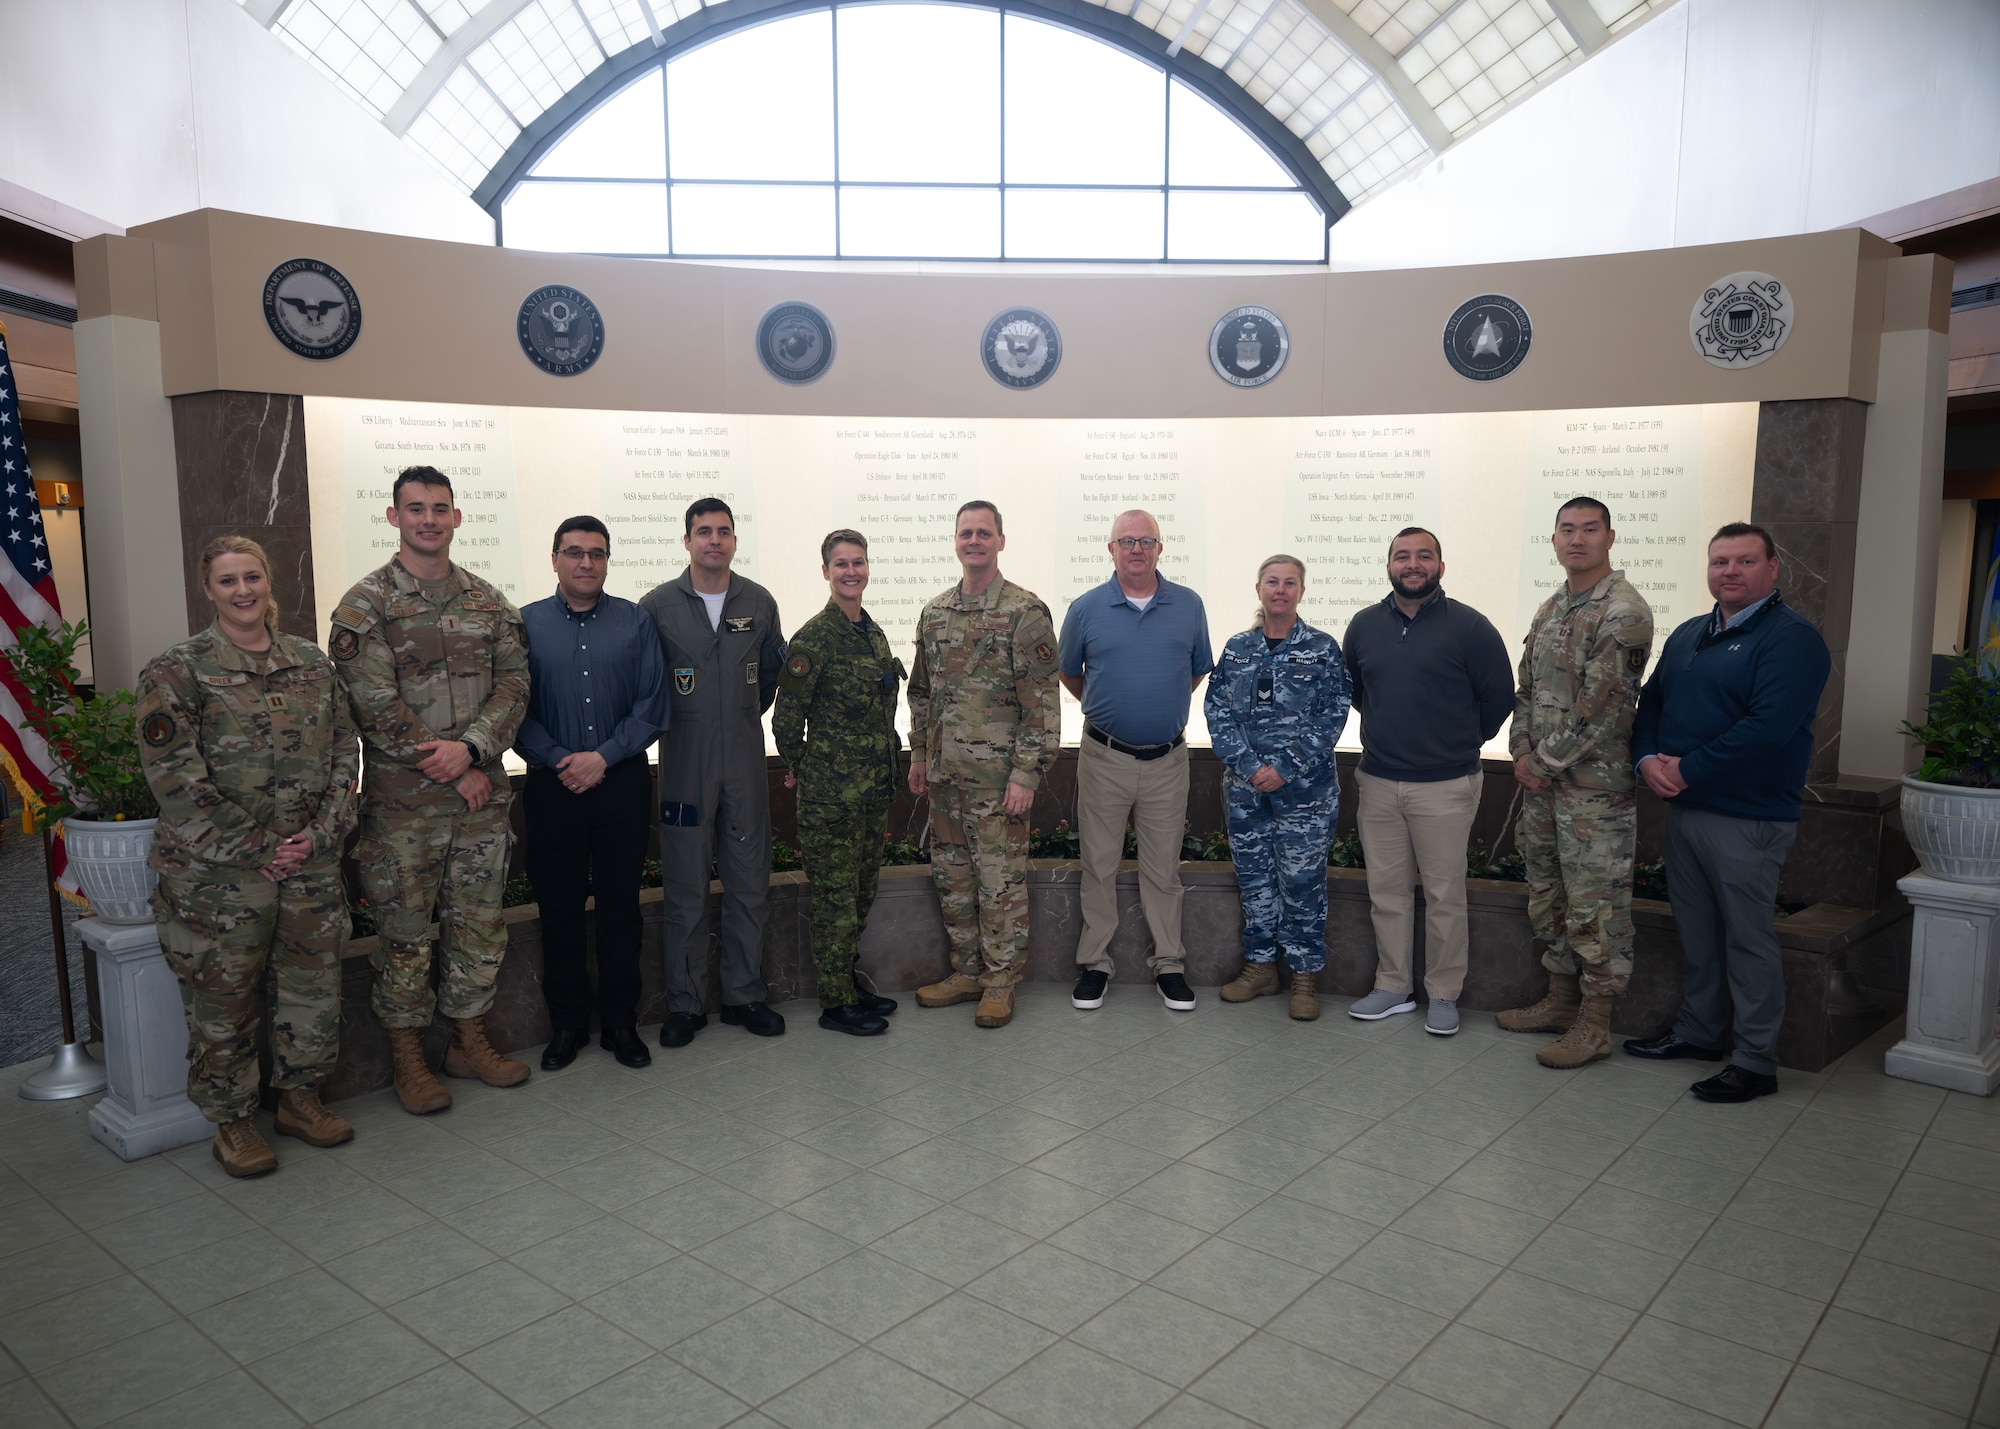 Foreign Liaison Officers pose for a photo during an orientation at Air Force Mortuary Affairs Operations on Dover Air Force Base, Delaware, April 24, 2024. This visit gave the Foreign Liaison Officers a chance to learn about AFMAO’s role in honoring our fallen. (U.S. Air Force photo by Staff Sgt. Jayden Ford)